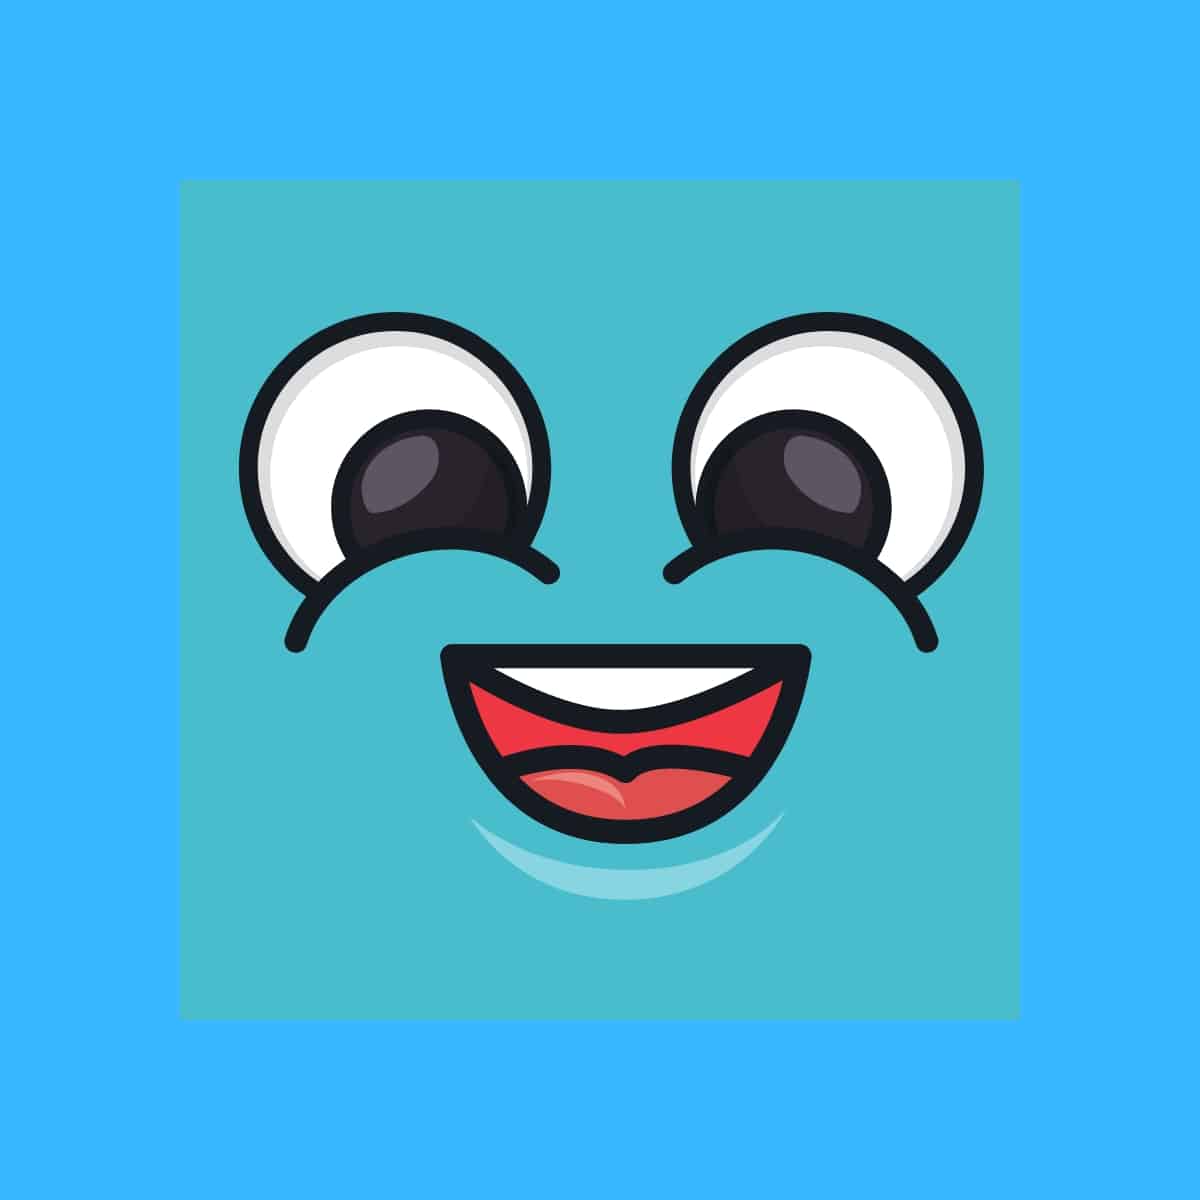 Cartoon graphic of a green square smiling with its mouth open on blue background.